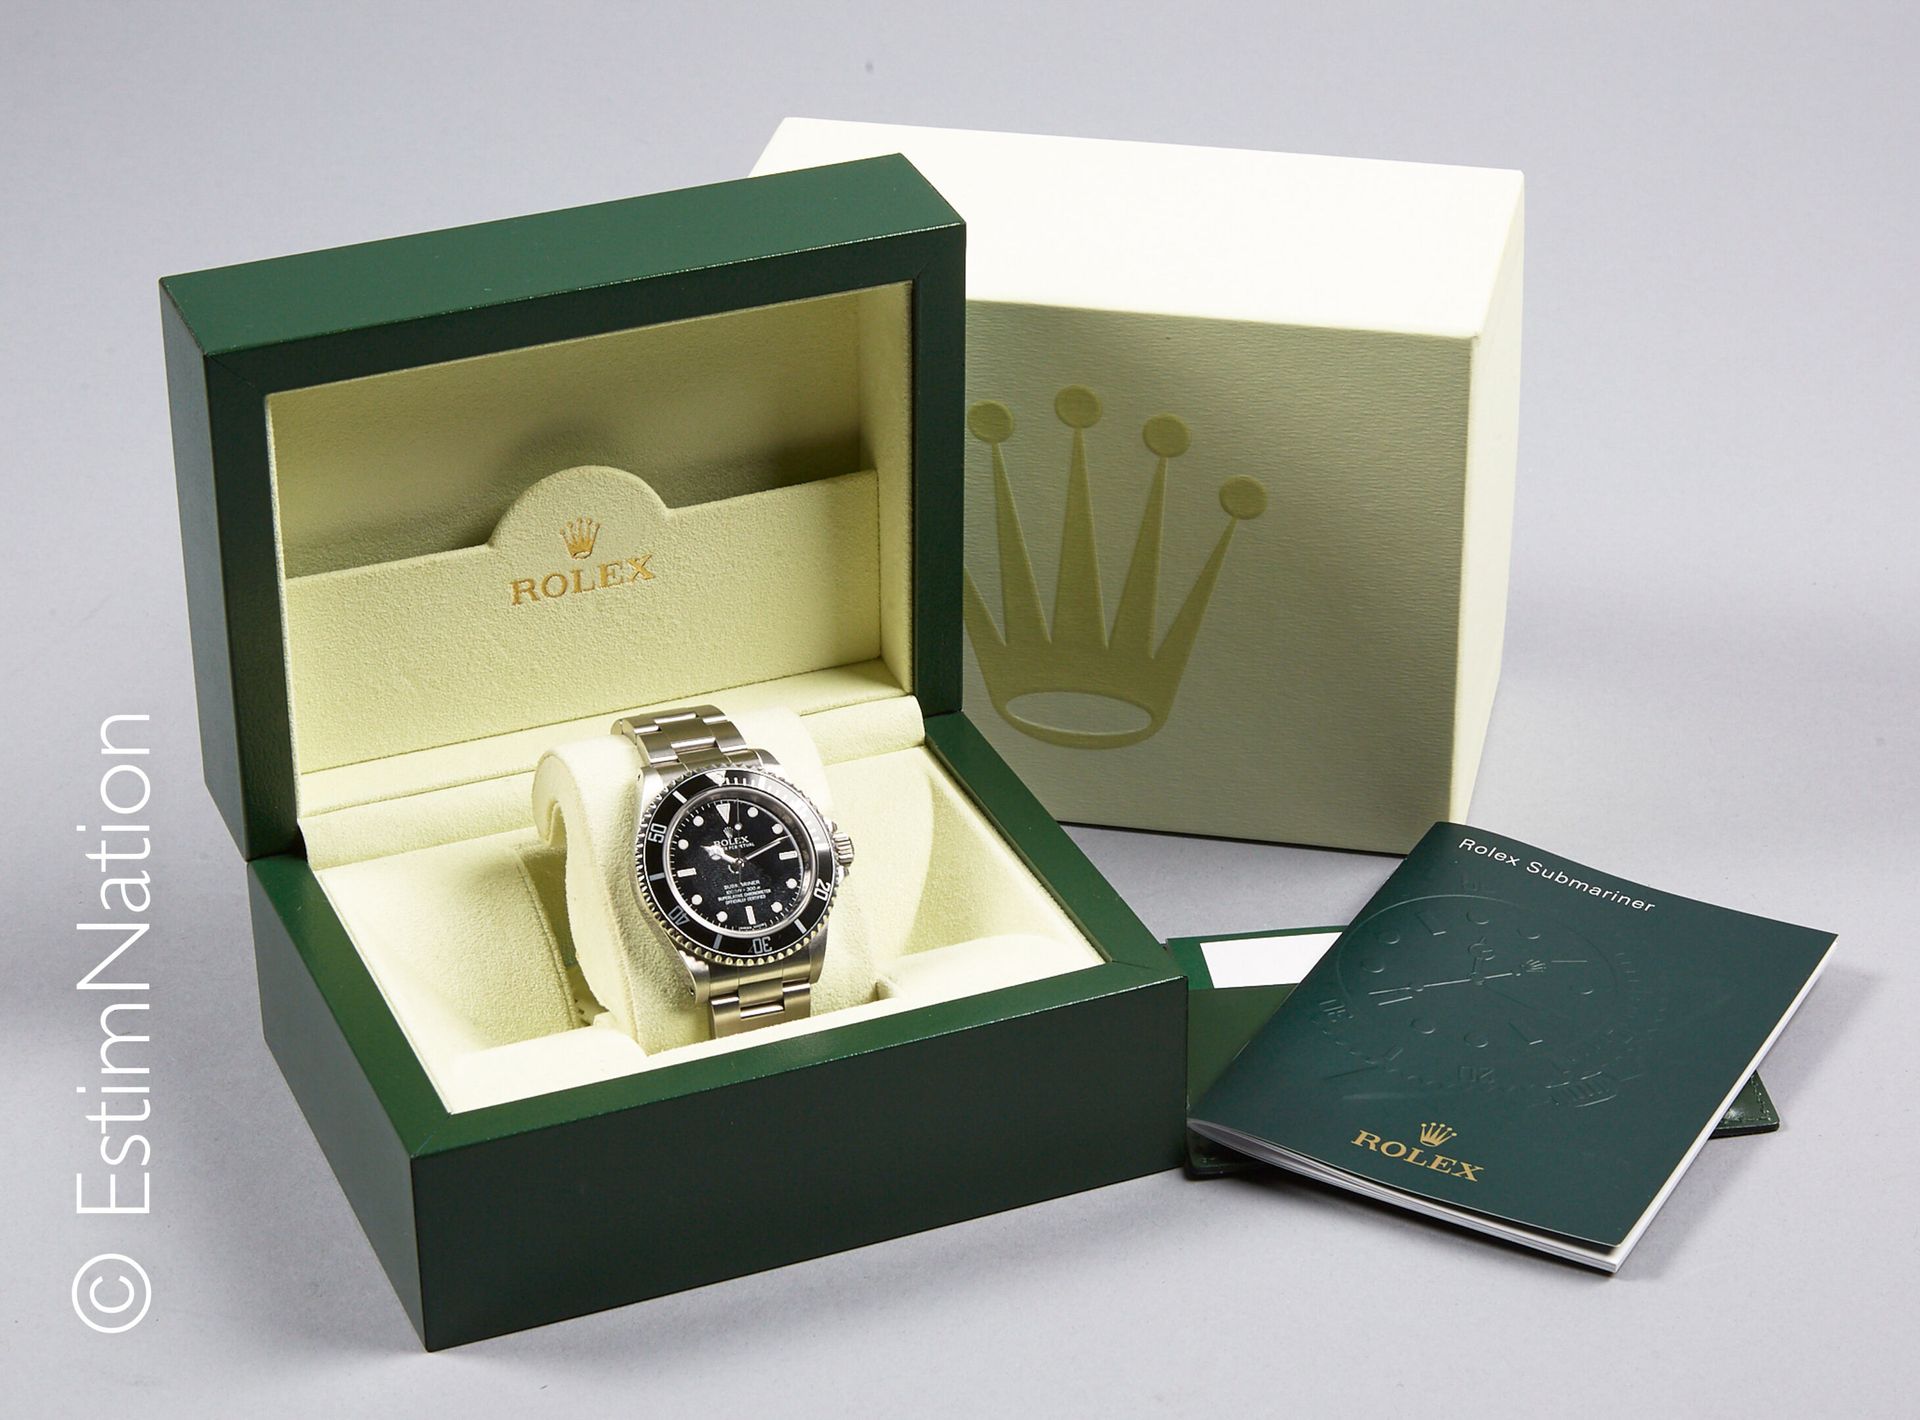 ROLEX SUBMARINER - ANNÉE 2012 
Rolex 





Oyster Perpetual Submariner





Rife&hellip;